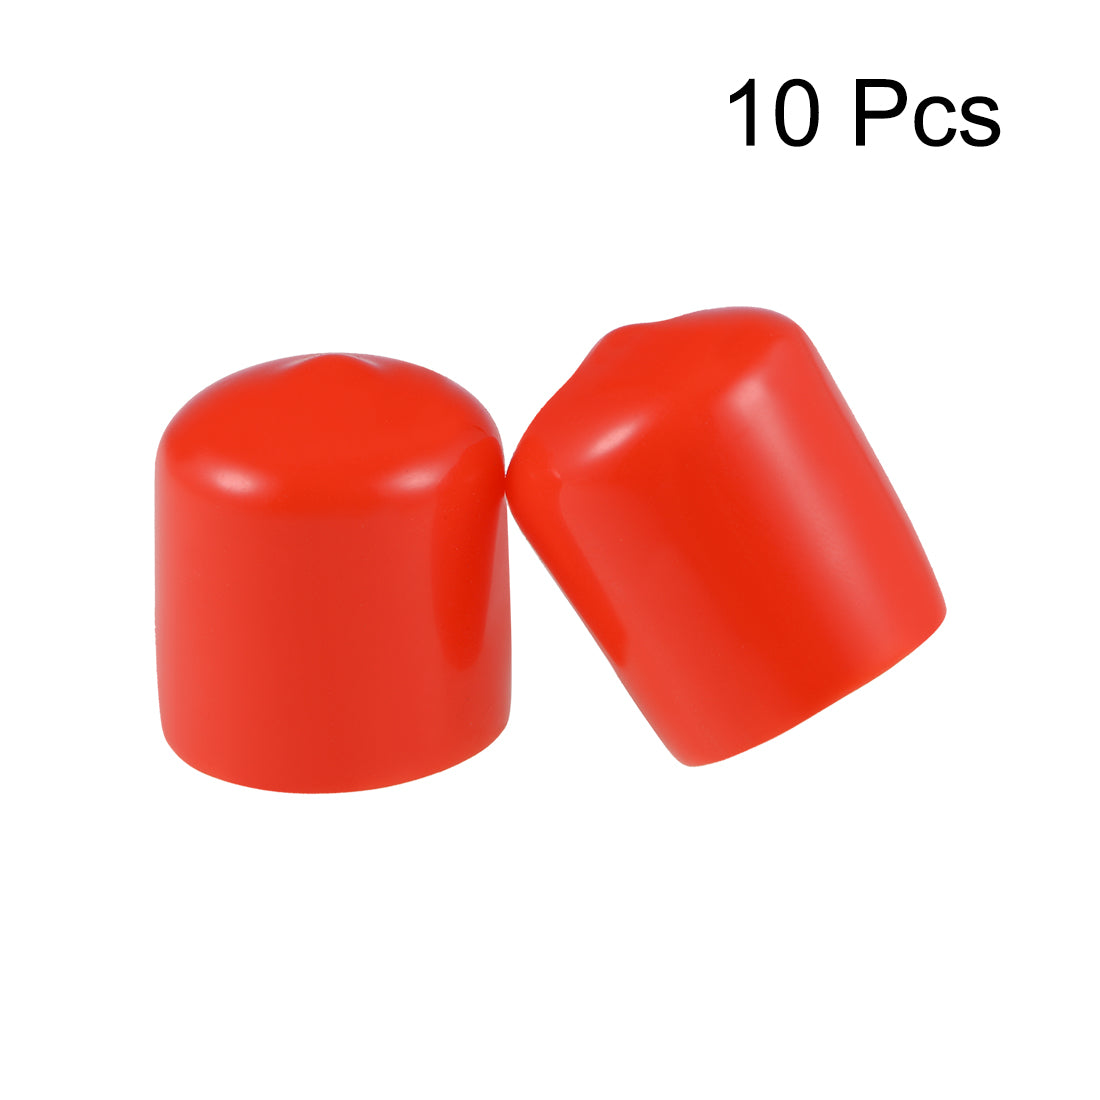 uxcell Uxcell Screw Thread Protector, 21mm ID Round End Cap Cover Red Tube Caps 10pcs